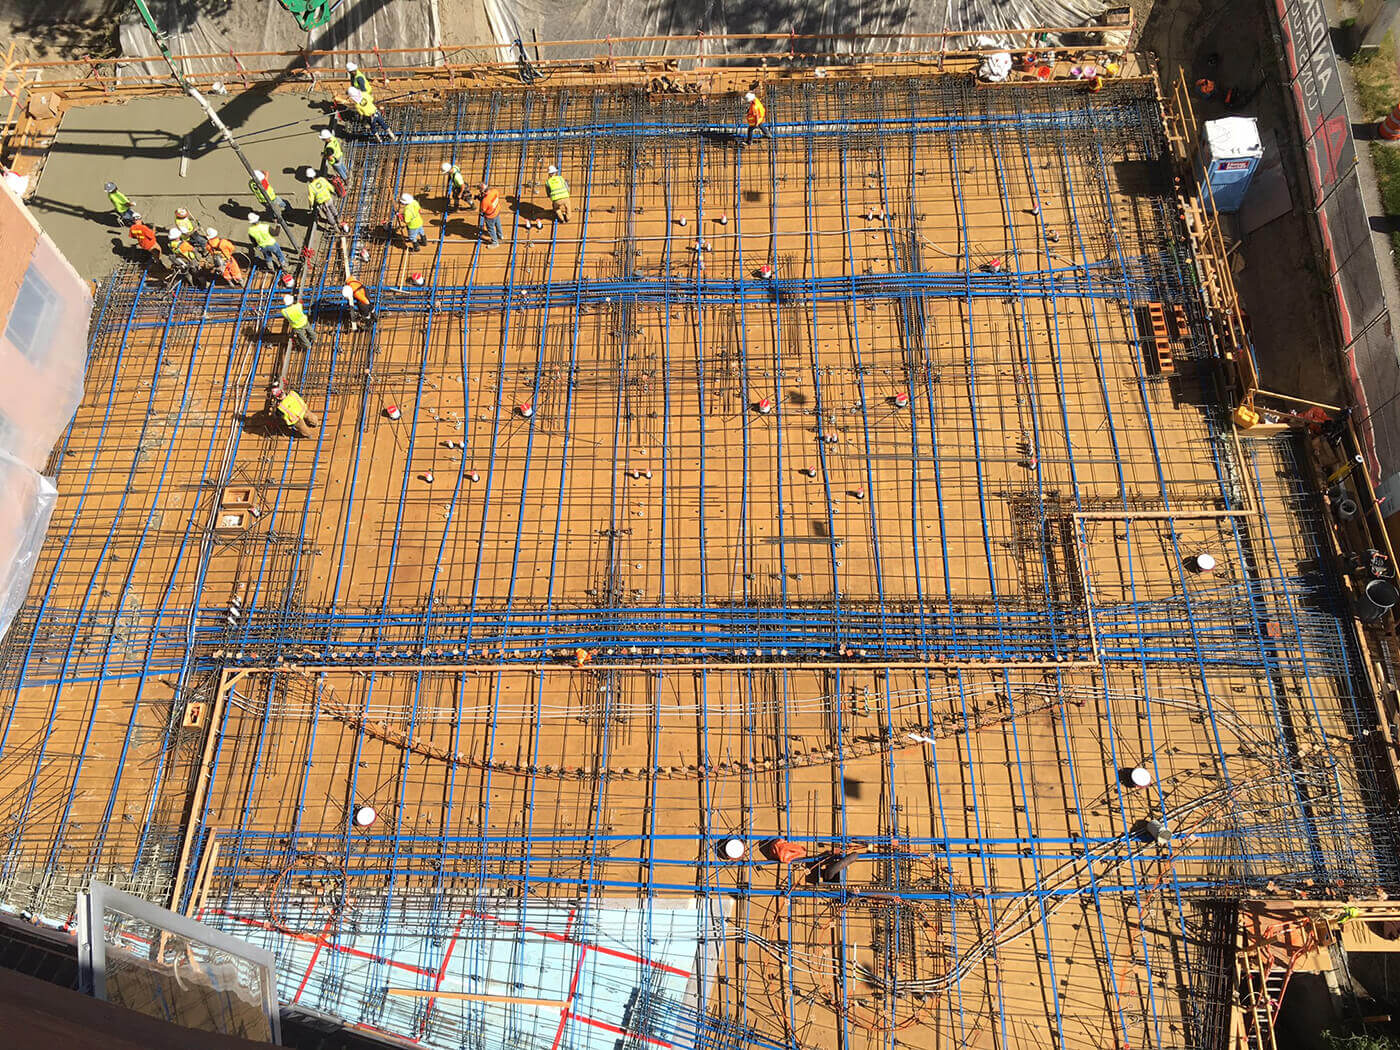 Construction workers laying concrete